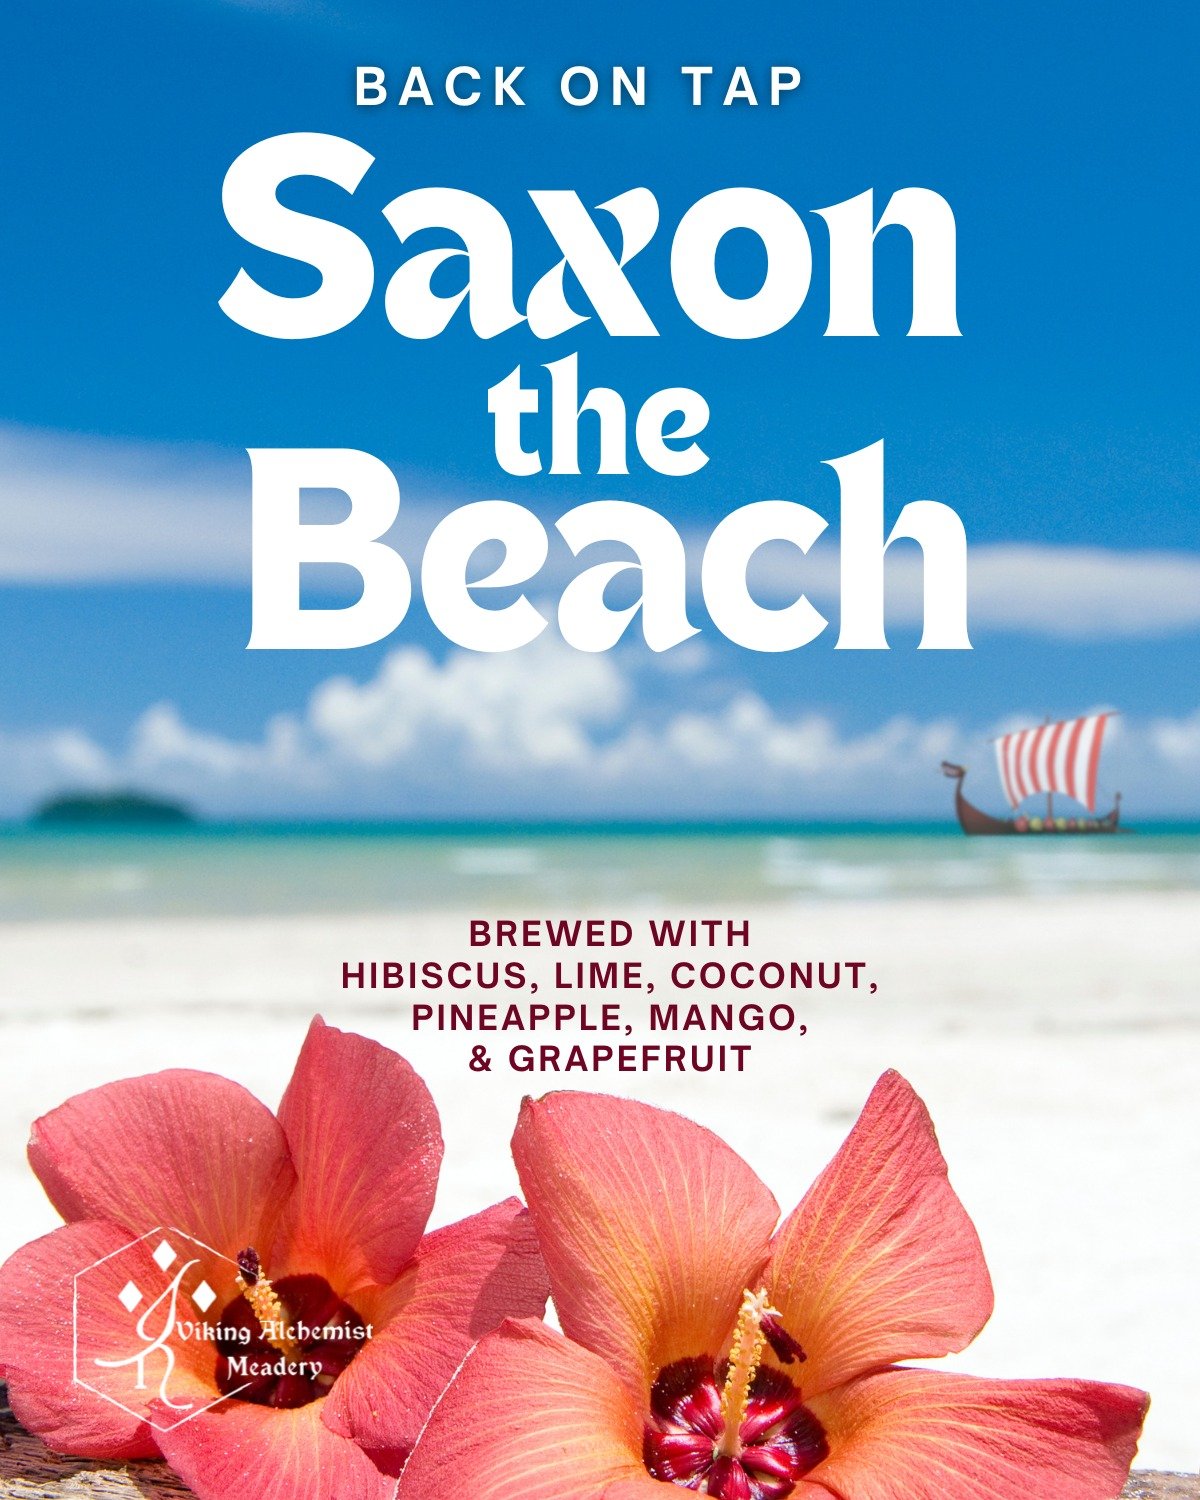 Our Summer session is back!
Saxon the Beach: Brewed with hibiscus, lime, coconut, pineapple, mango, &amp; grapefruit is the perfect addition to warmer weather. 

A horde of Vikings showing up on your shore? Nope!
A gaggle of Vikings carrying Saxon th